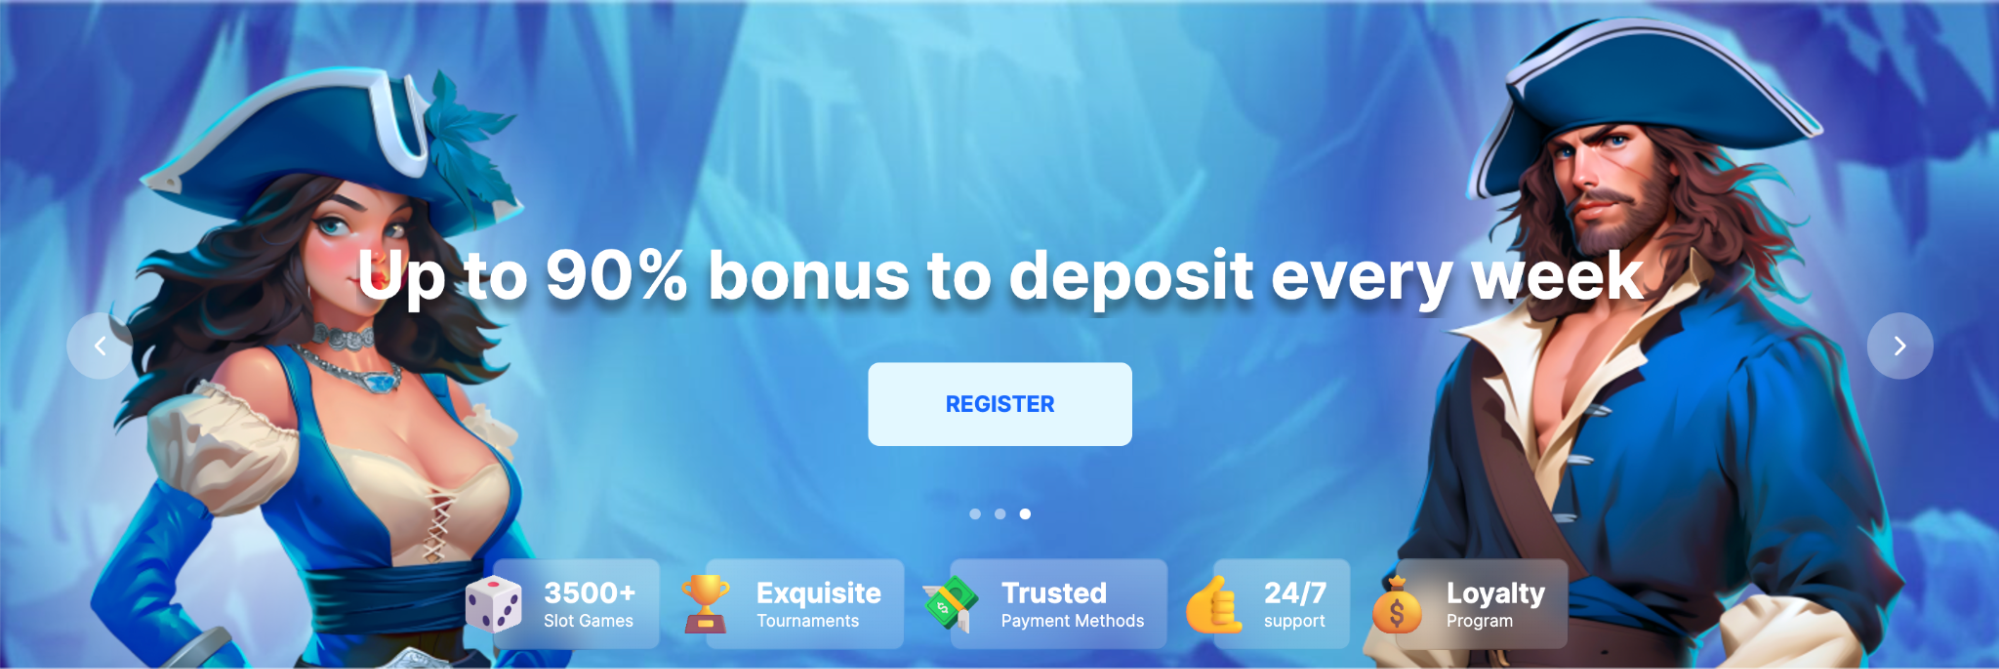 Get the Best Ice Casino No Deposit Bonus for New Players Now!